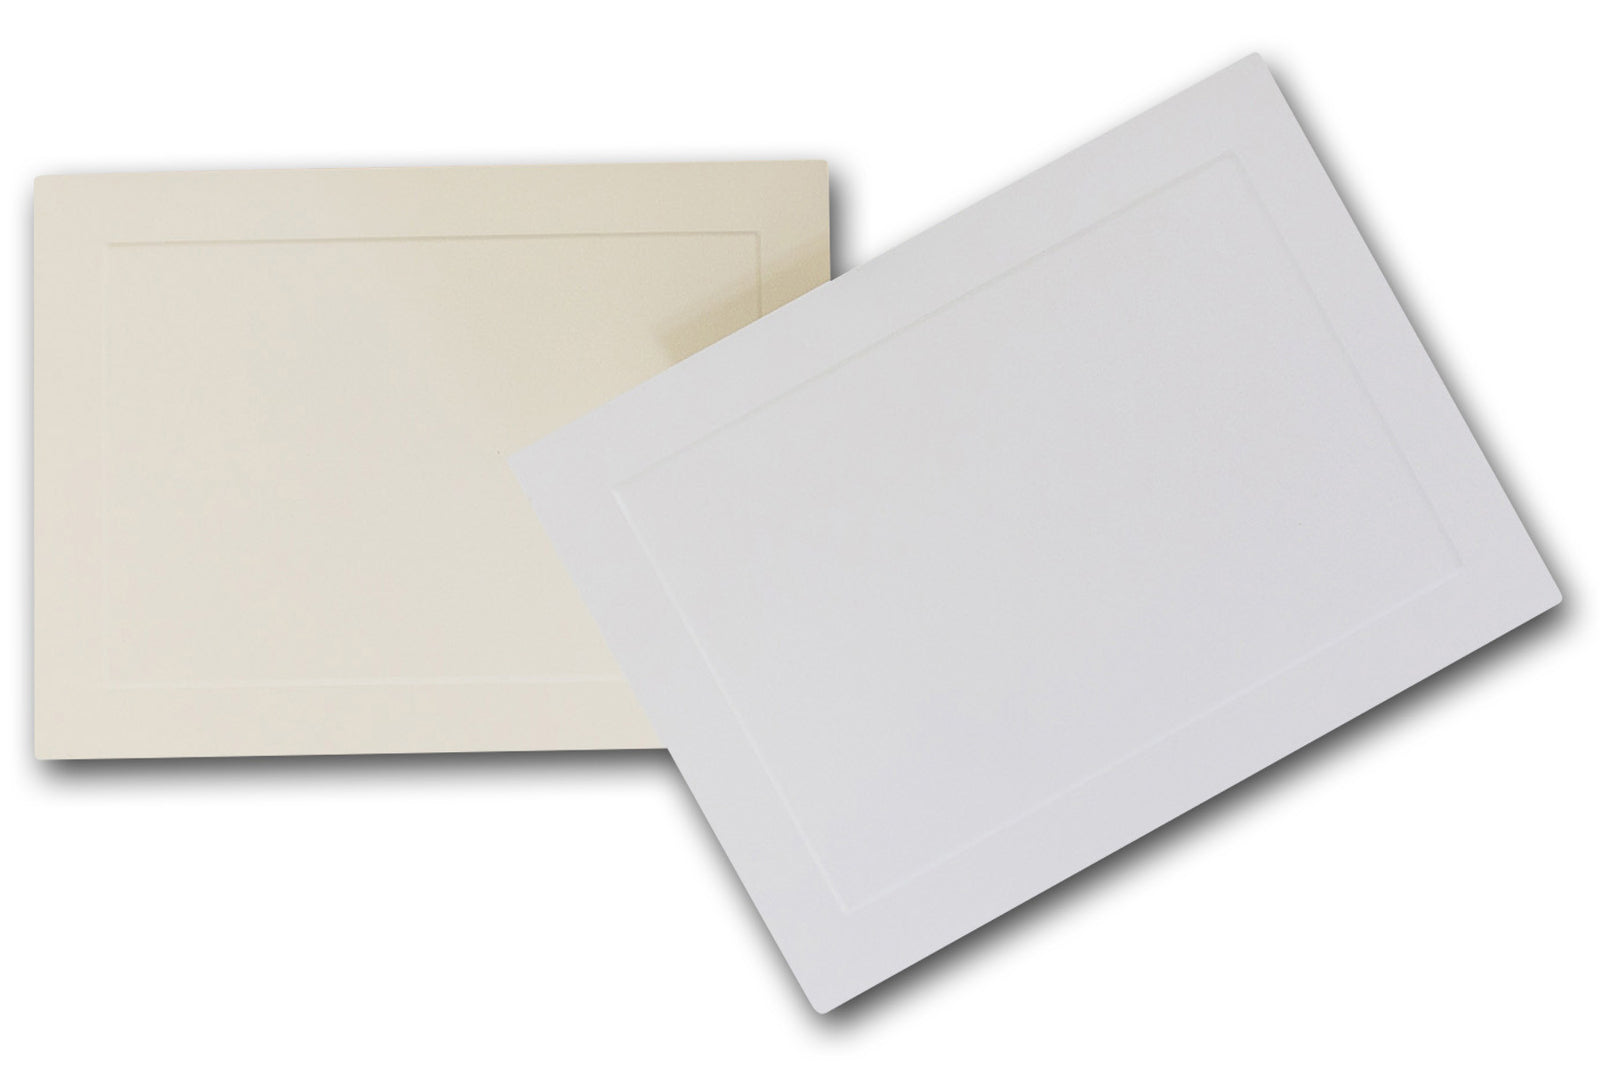 Ivory, Place card, 300 gsm – Deckle edge paper – Indian Cotton Paper Co.